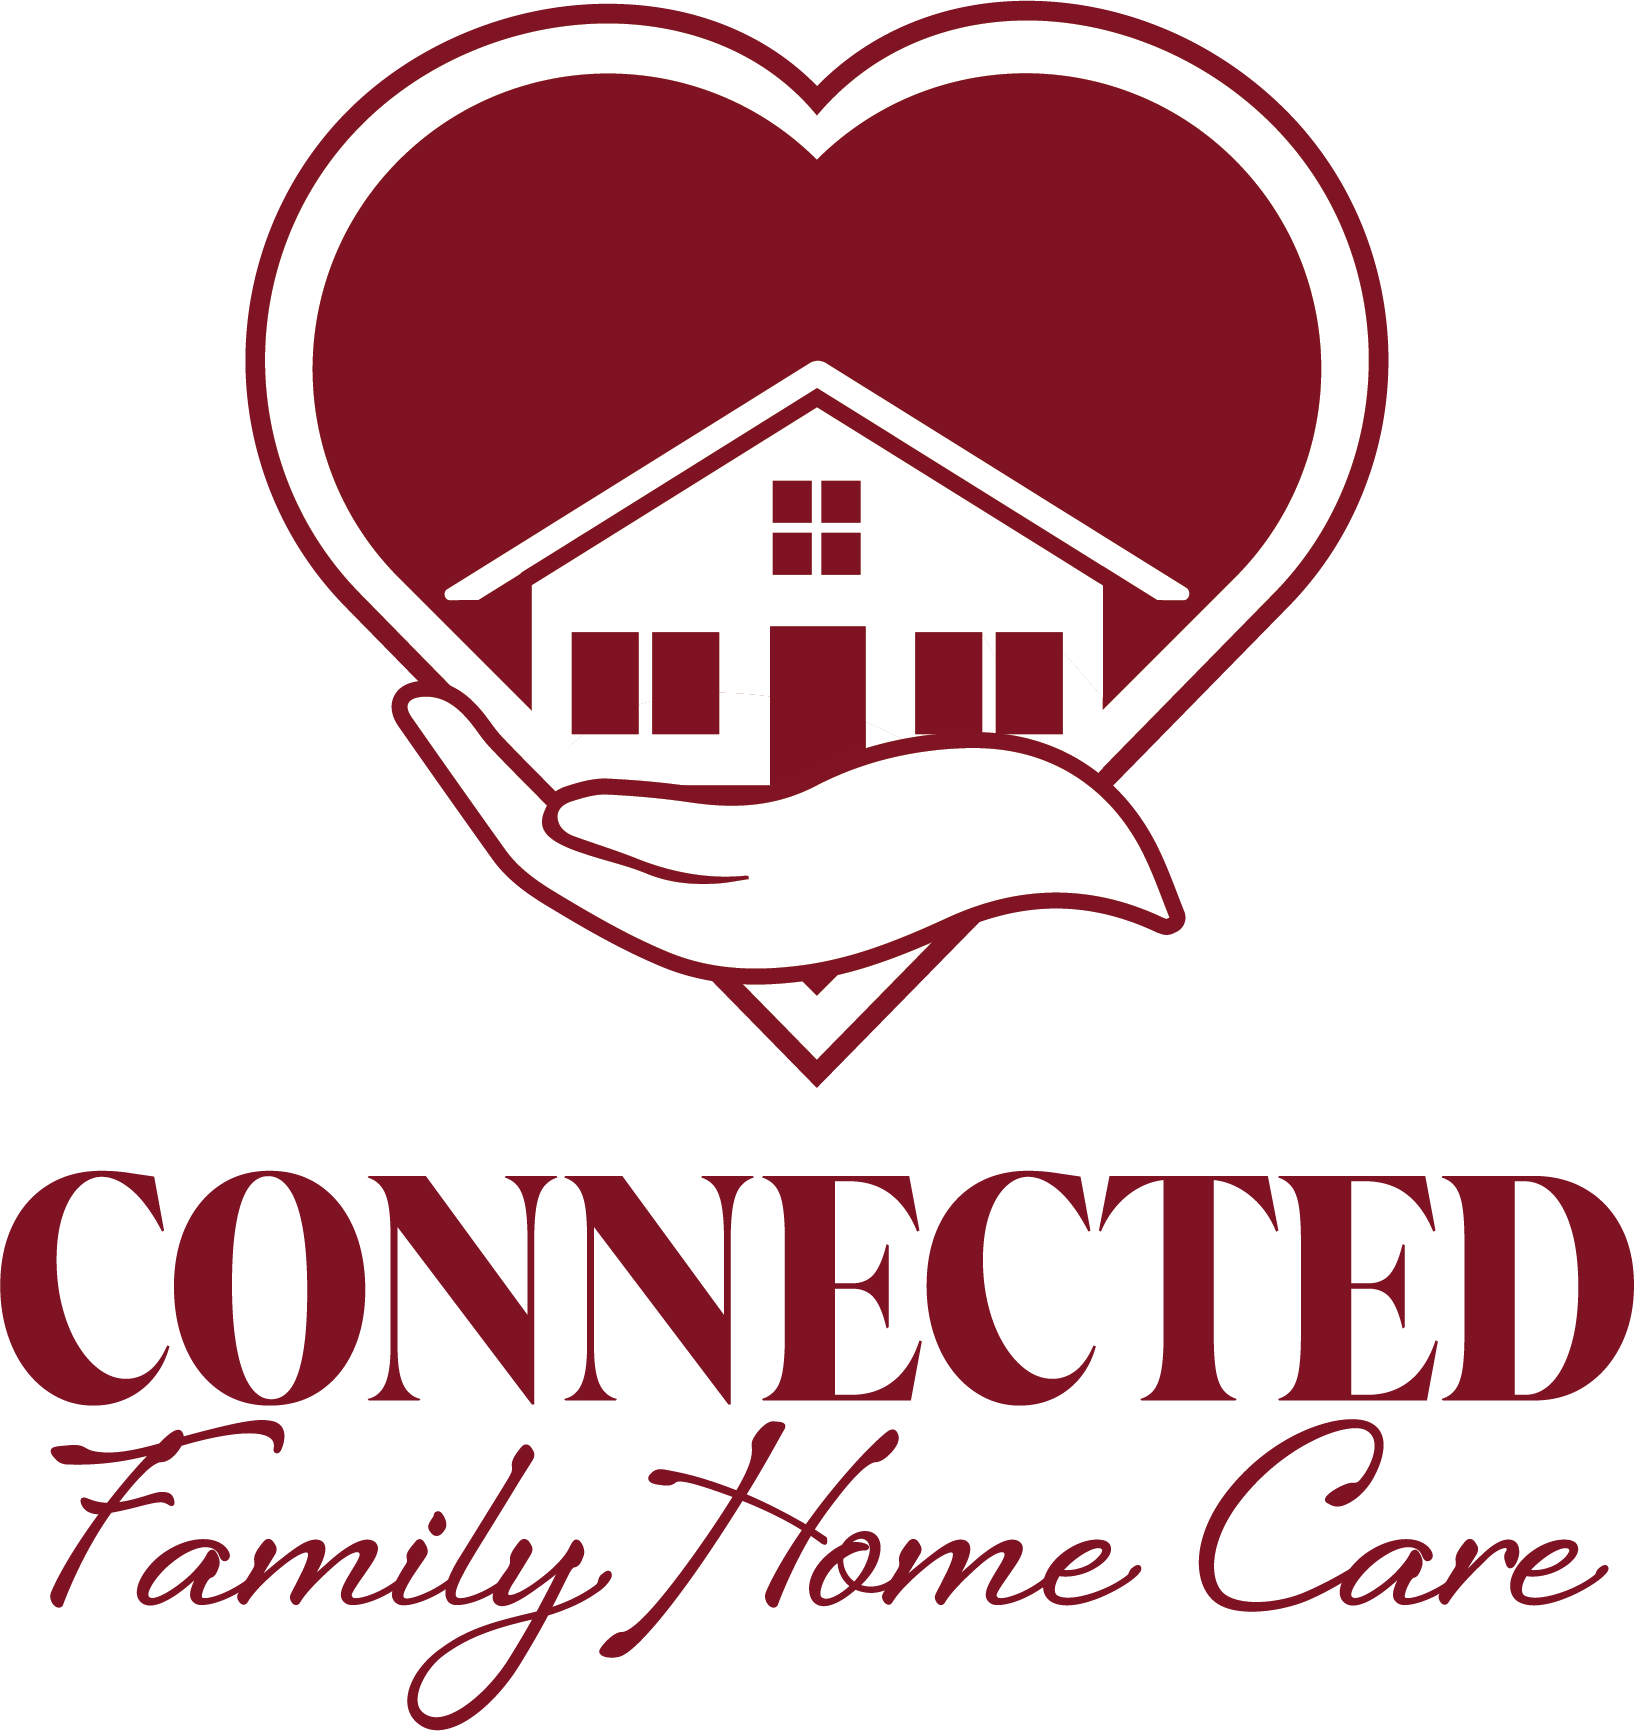 CX-88802 - Connected Family Home Care_final.png_1686773077